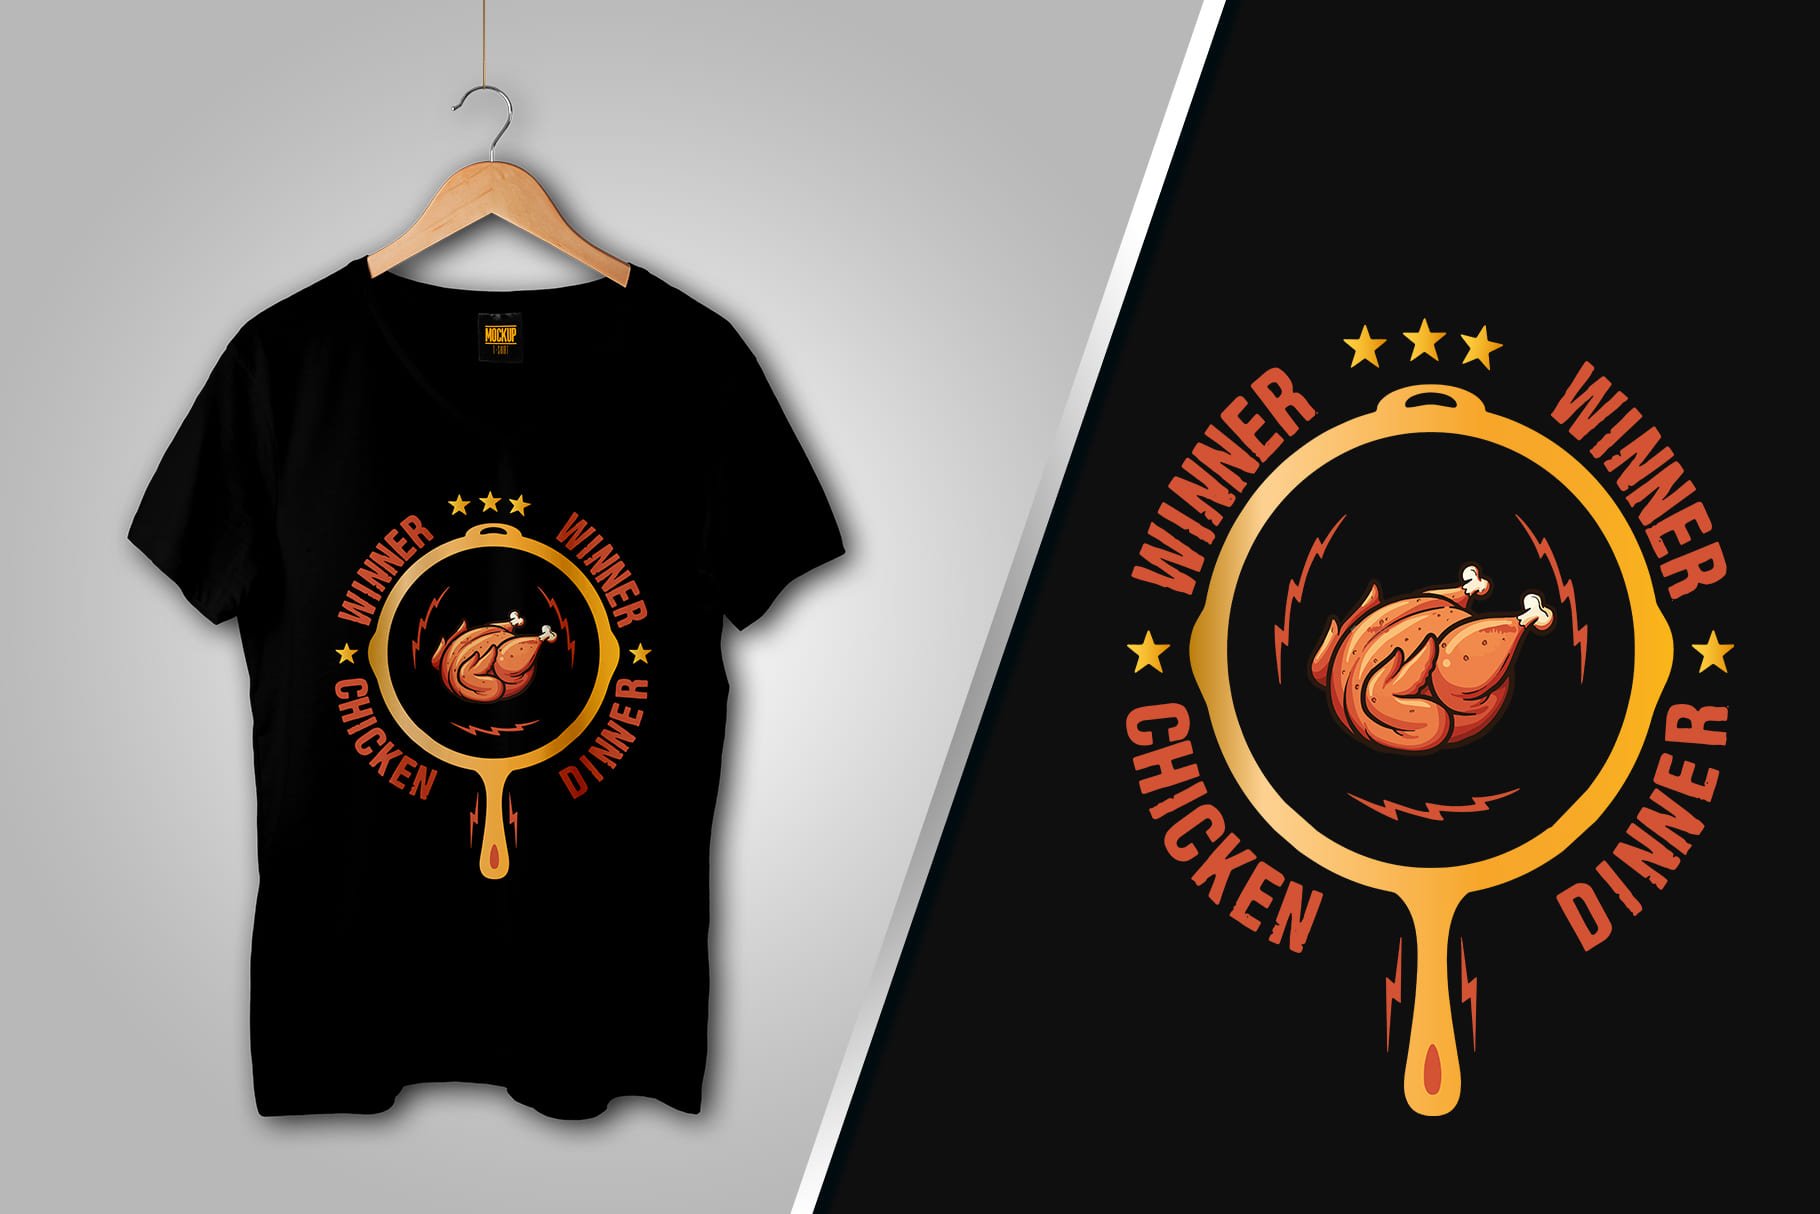 Black V-neck T-shirt featuring a badminton racket with a grilled chicken in the center and Winner wordmark.